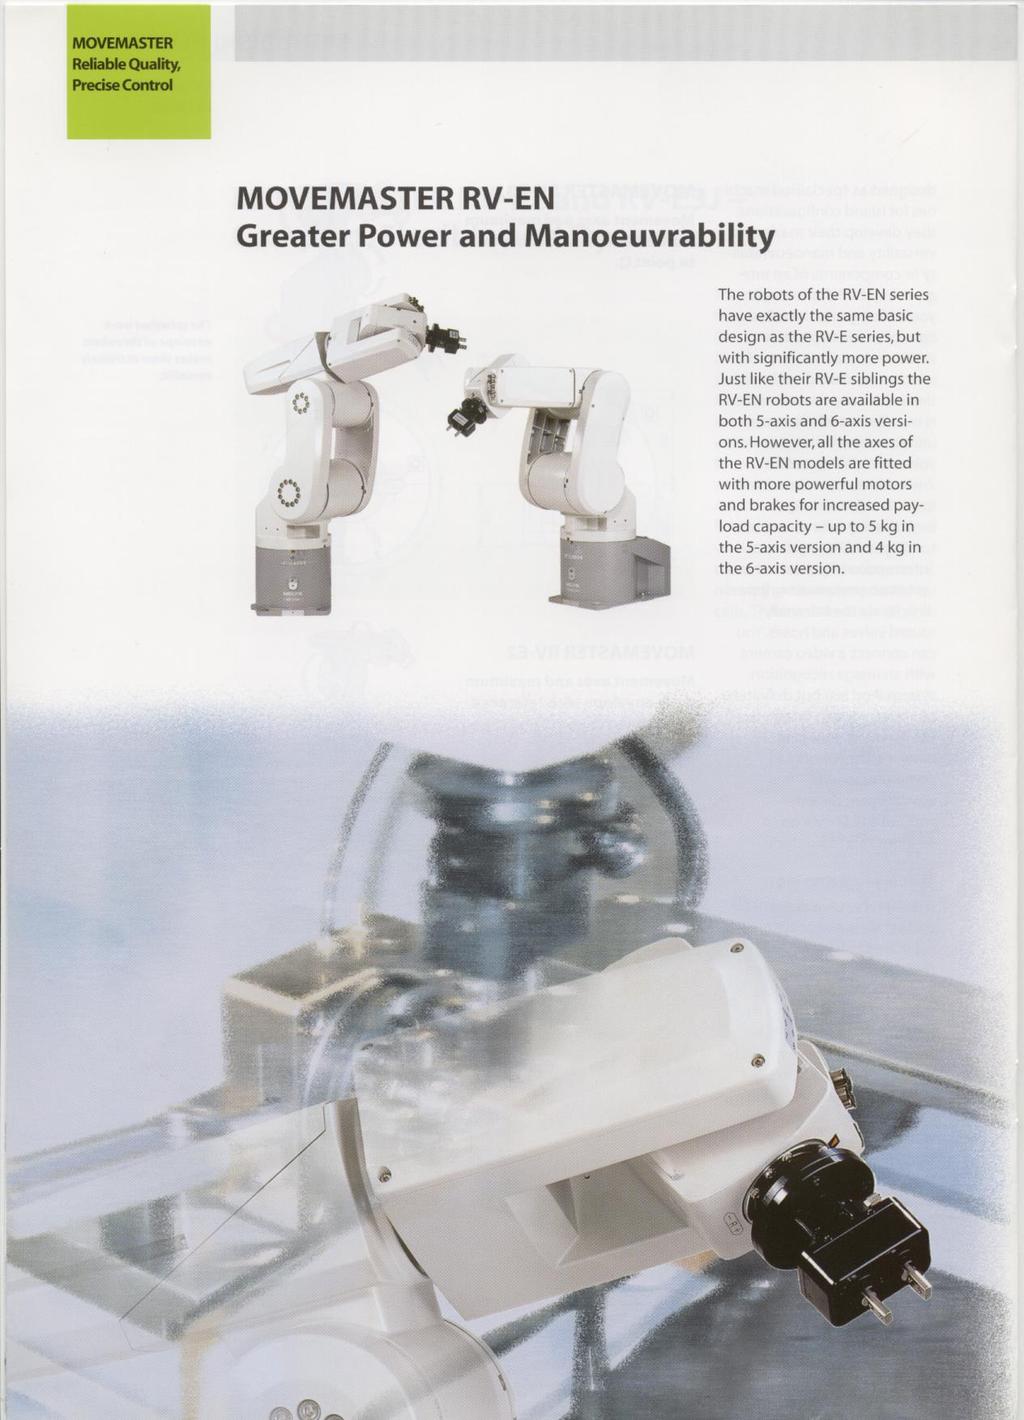 MOVEMASTER RV-EN Greater Power and Manoeuvrability The robots of the RV-EN series have exactly the same basic design as the RV-E series but with significantly more power.